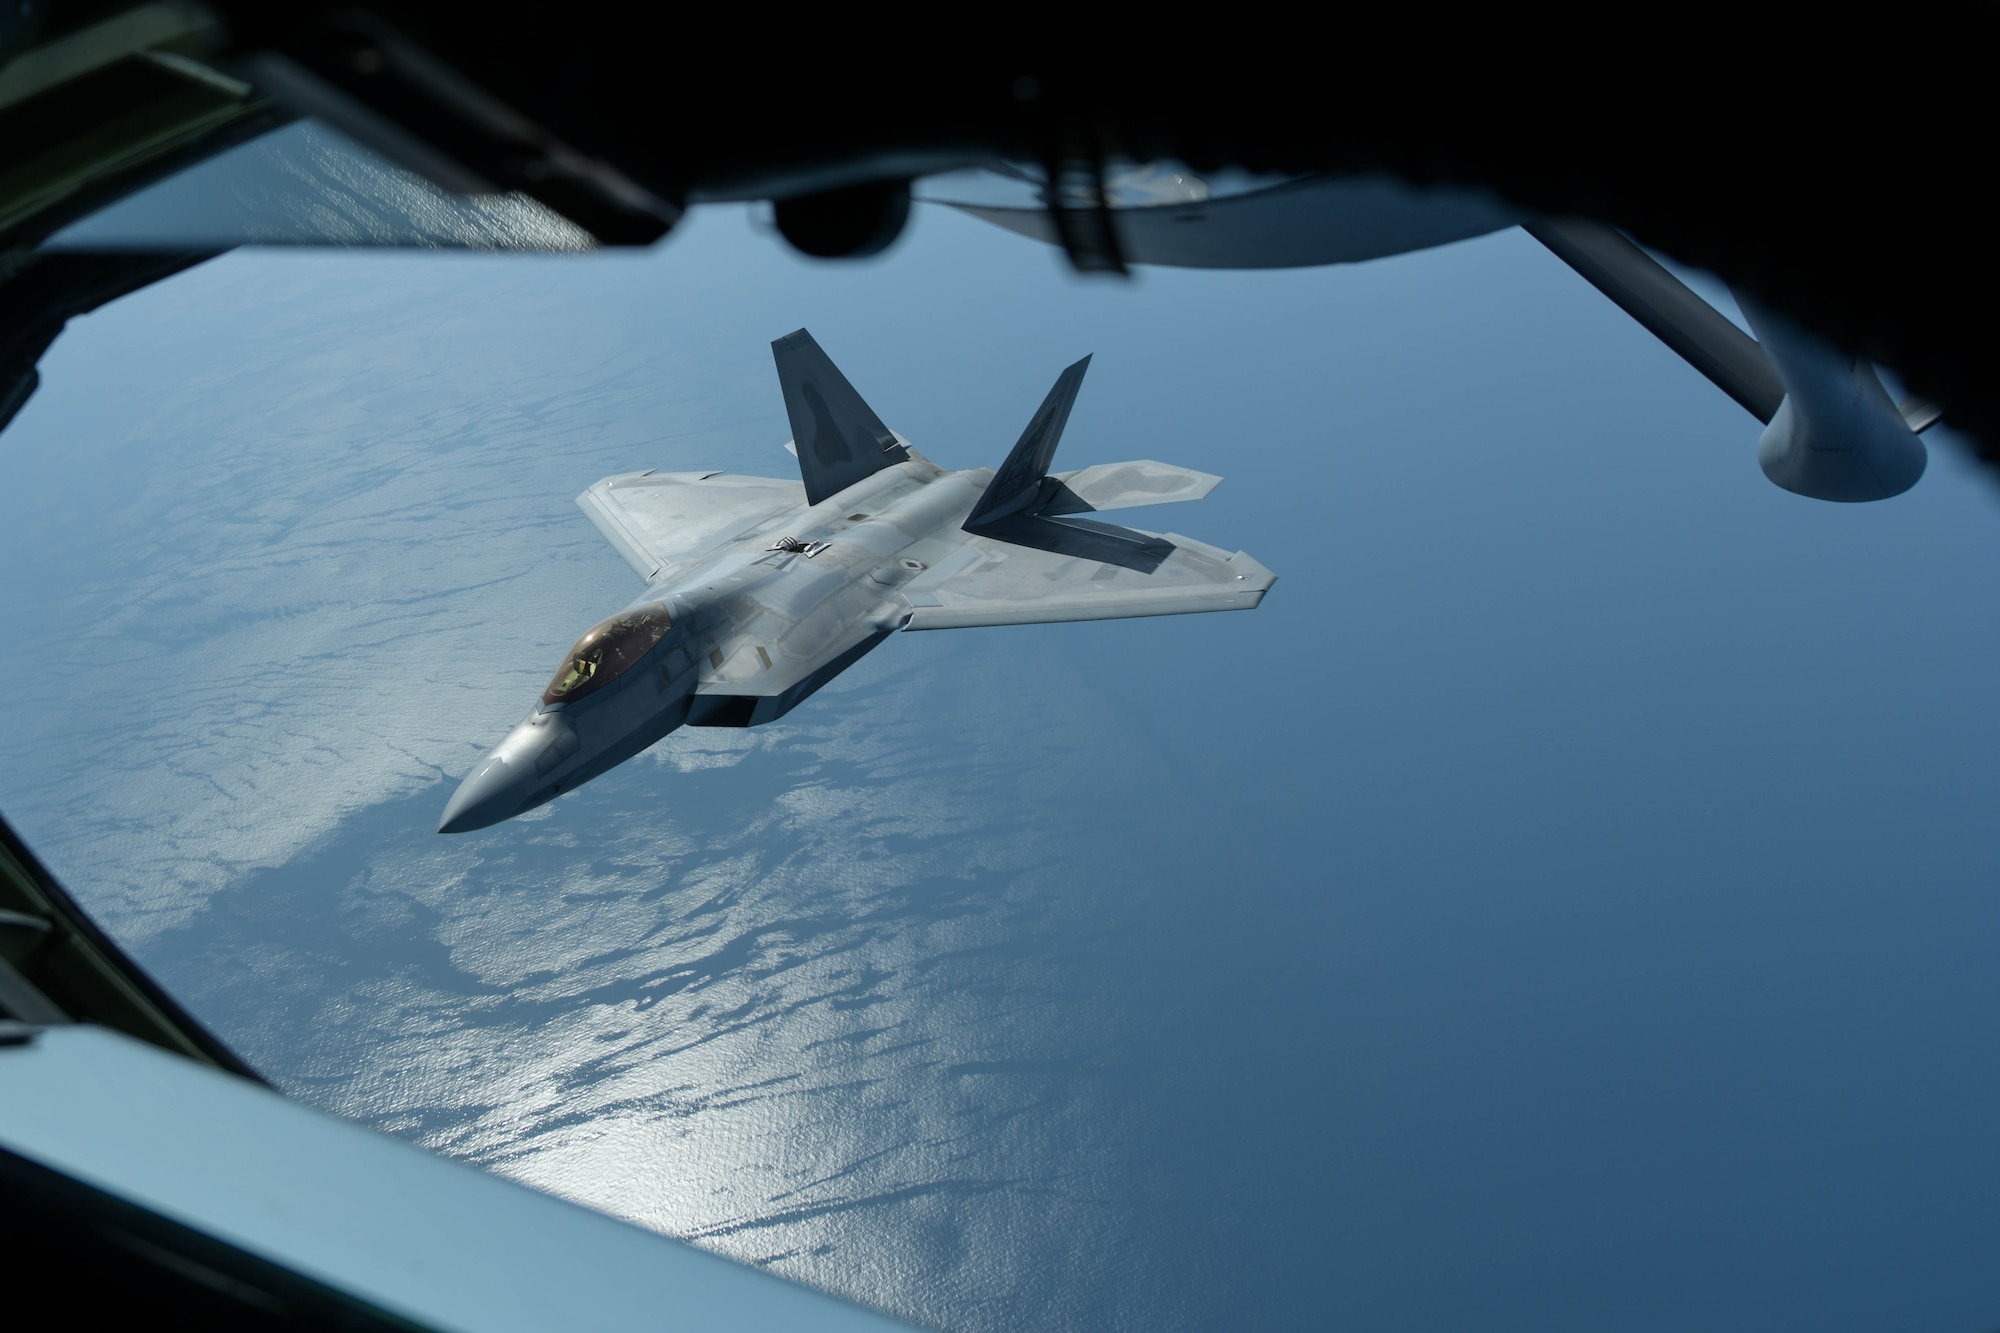 A U.S. Air Force F-22 Raptor from the 199th Fighter Squadron assigned to Joint Base Pearl Harbor-Hickam, Hawaii, flies alongside a KC-135 Stratotanker from the 909th Air Refueling Squadron from Kadena Air Base, Japan, after being refueled, April 1, 2021. The 199th Fighter Squadron deployed to Marine Corps Air Station Iwakuni, Japan, to conduct integrated training with Marine and Naval forces as part of U.S. Indo-Pacific Command’s dynamic force employment concept. (U.S. Air Force photo by Senior Airman Rebeckah Medeiros)